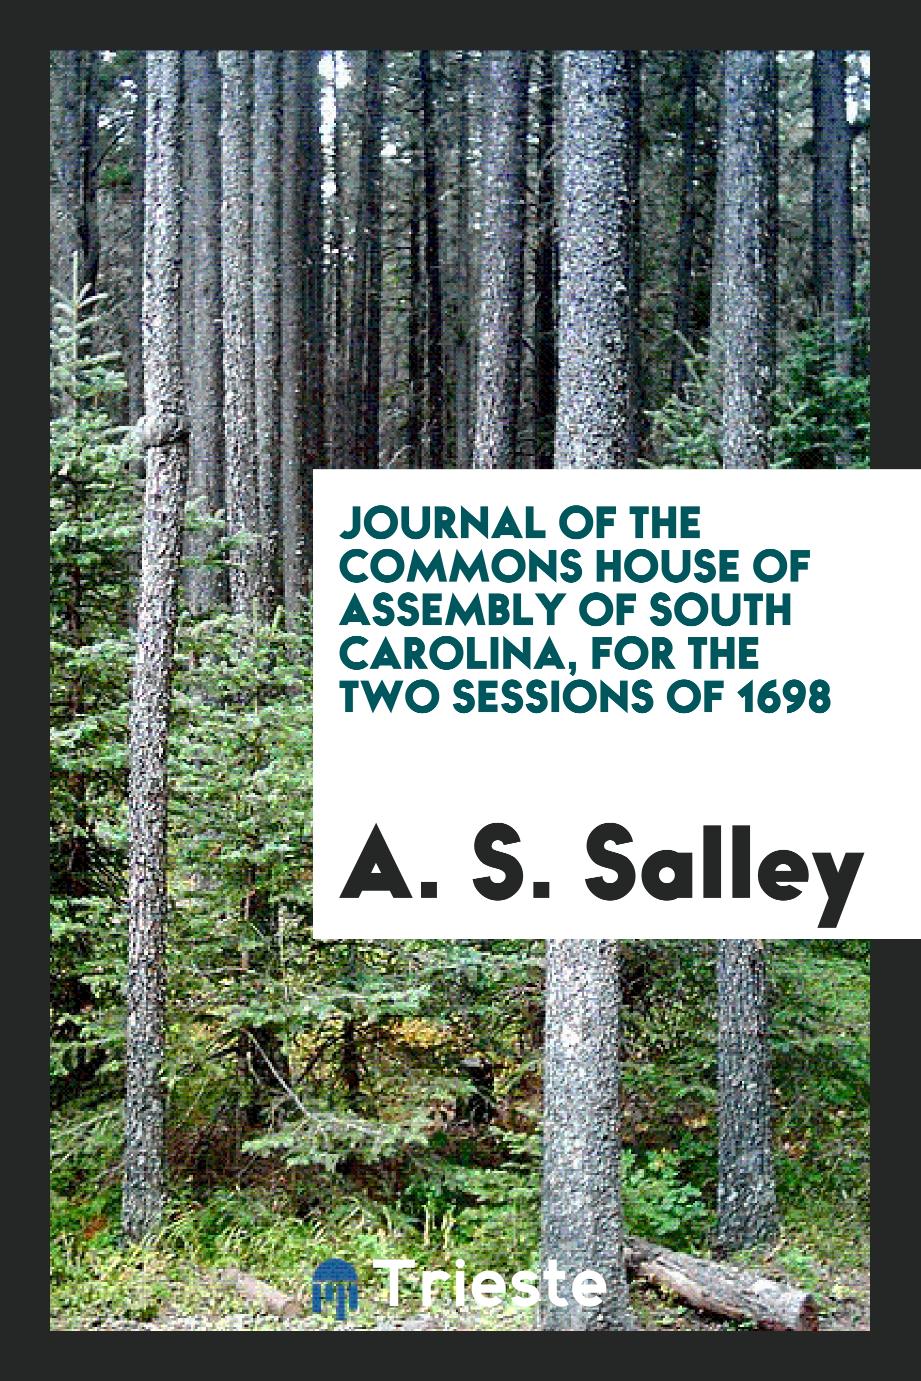 Journal of the Commons House of Assembly of South Carolina, for the two sessions of 1698